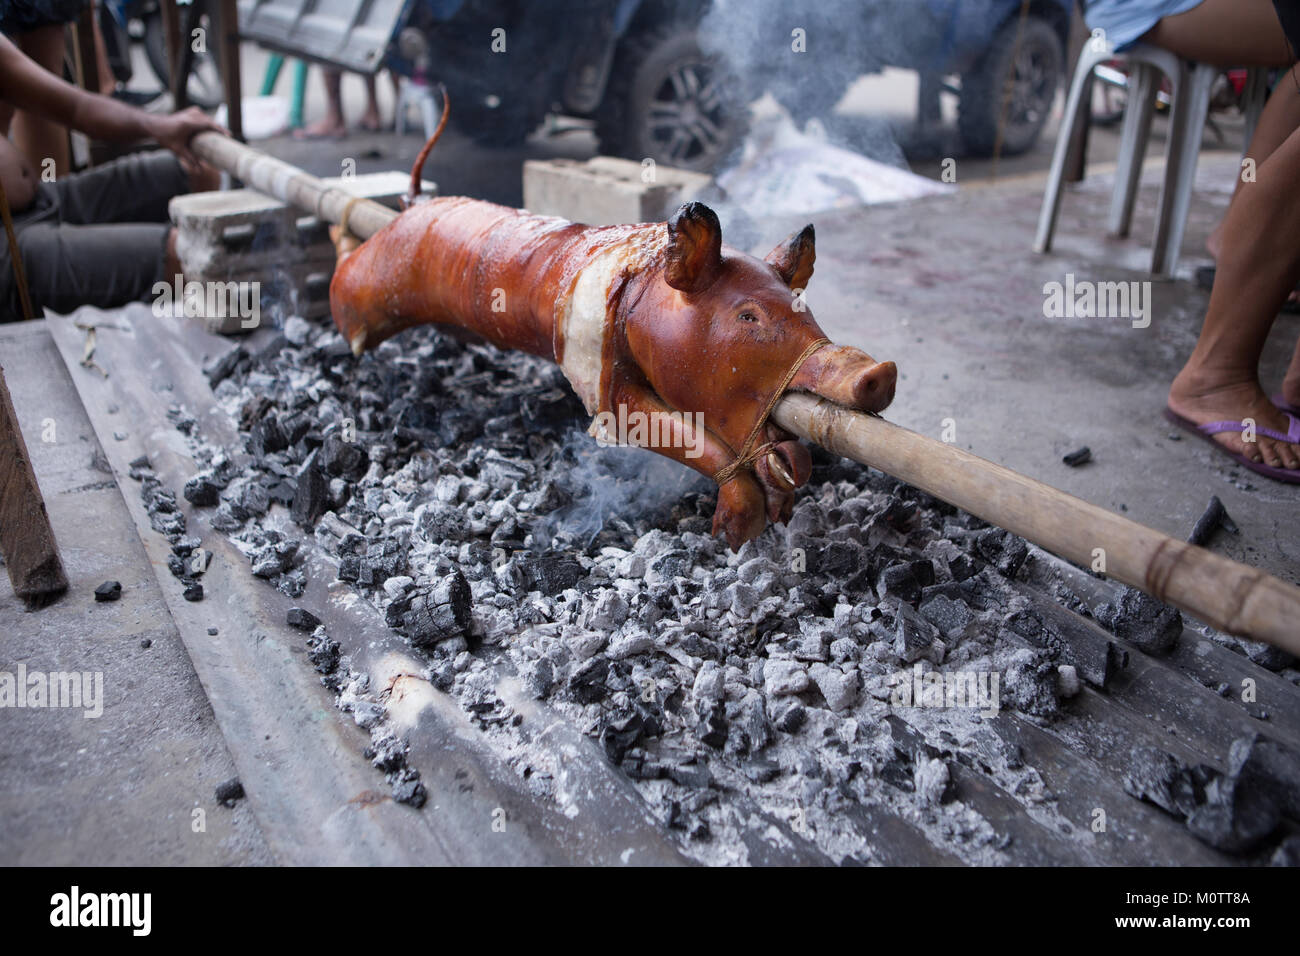 Spit Roasted Pig known as Lechon Baboy in the Philippines is a National Favourite food. Stock Photo